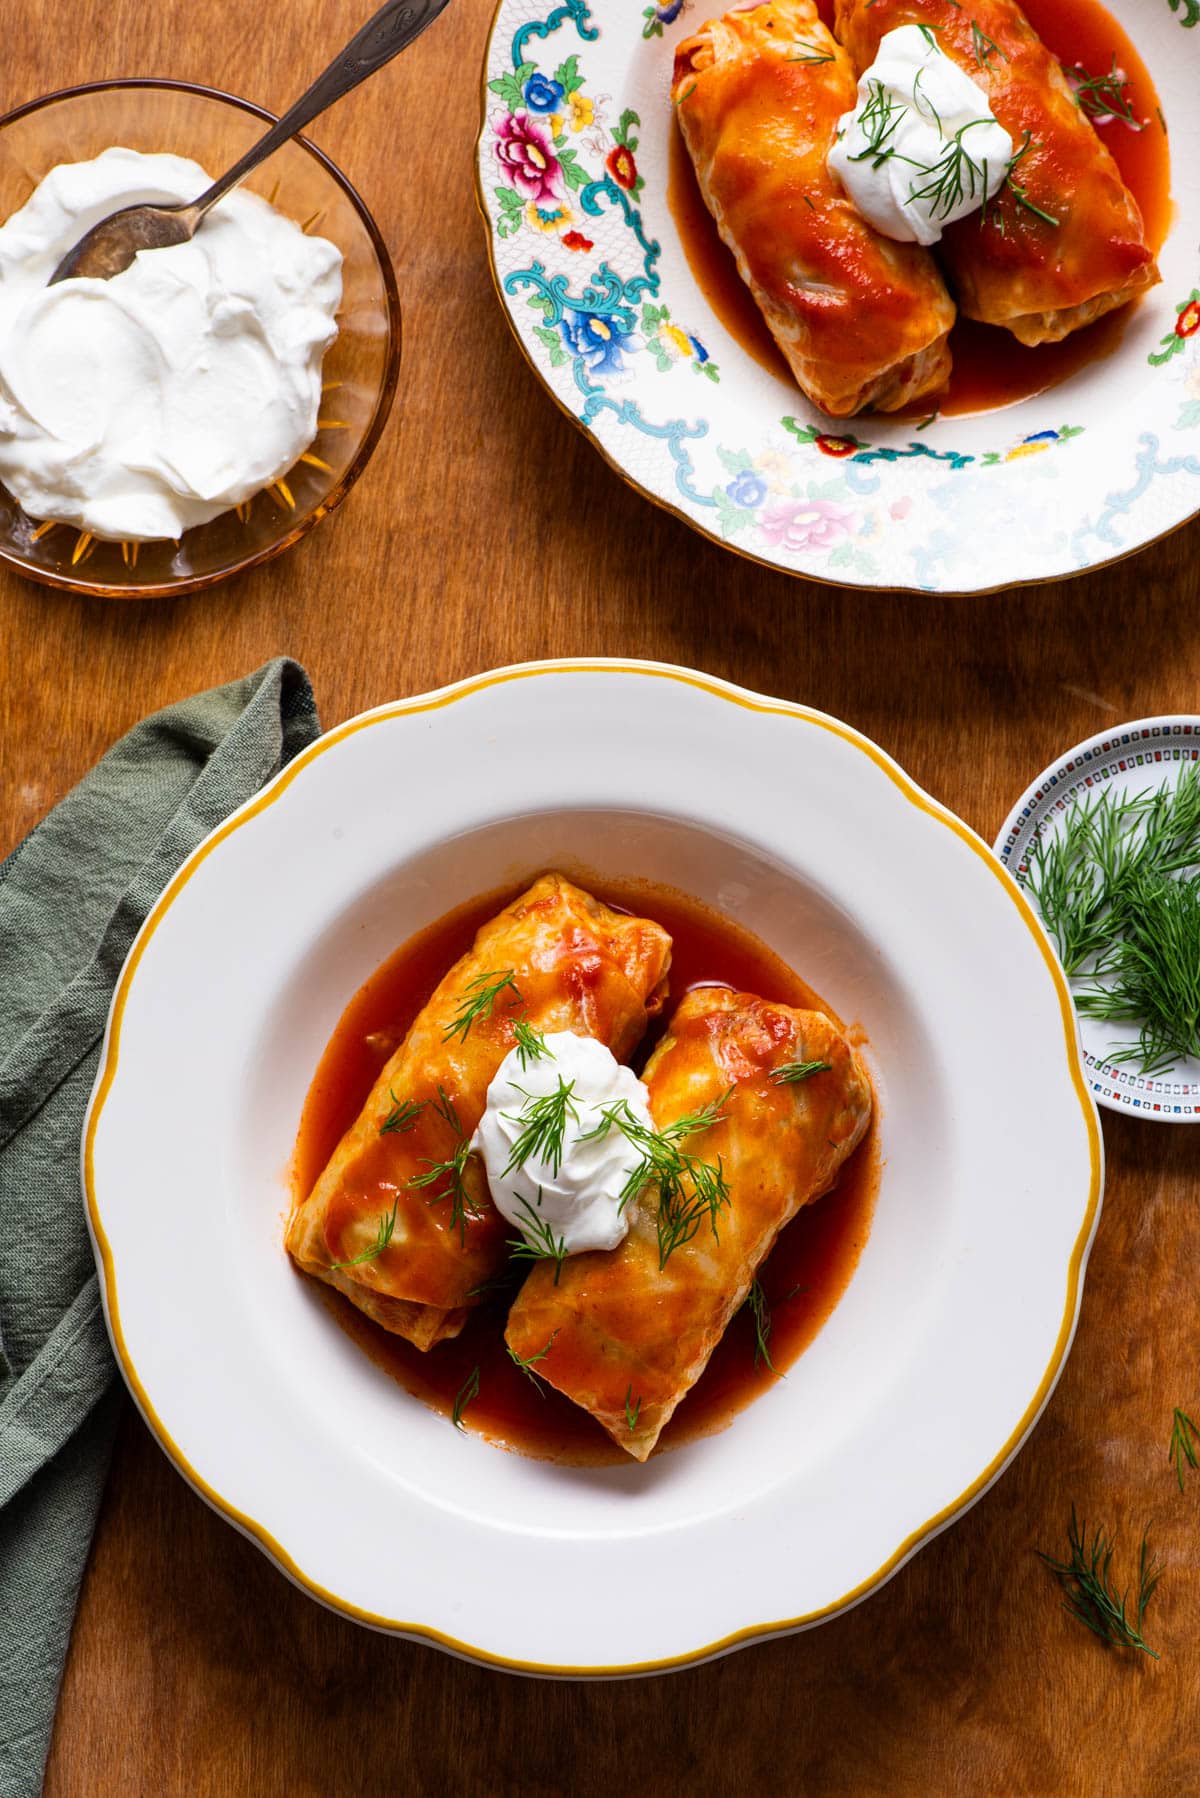 Vegetarian cabbage rolls served with tomato sauce and sour cream.